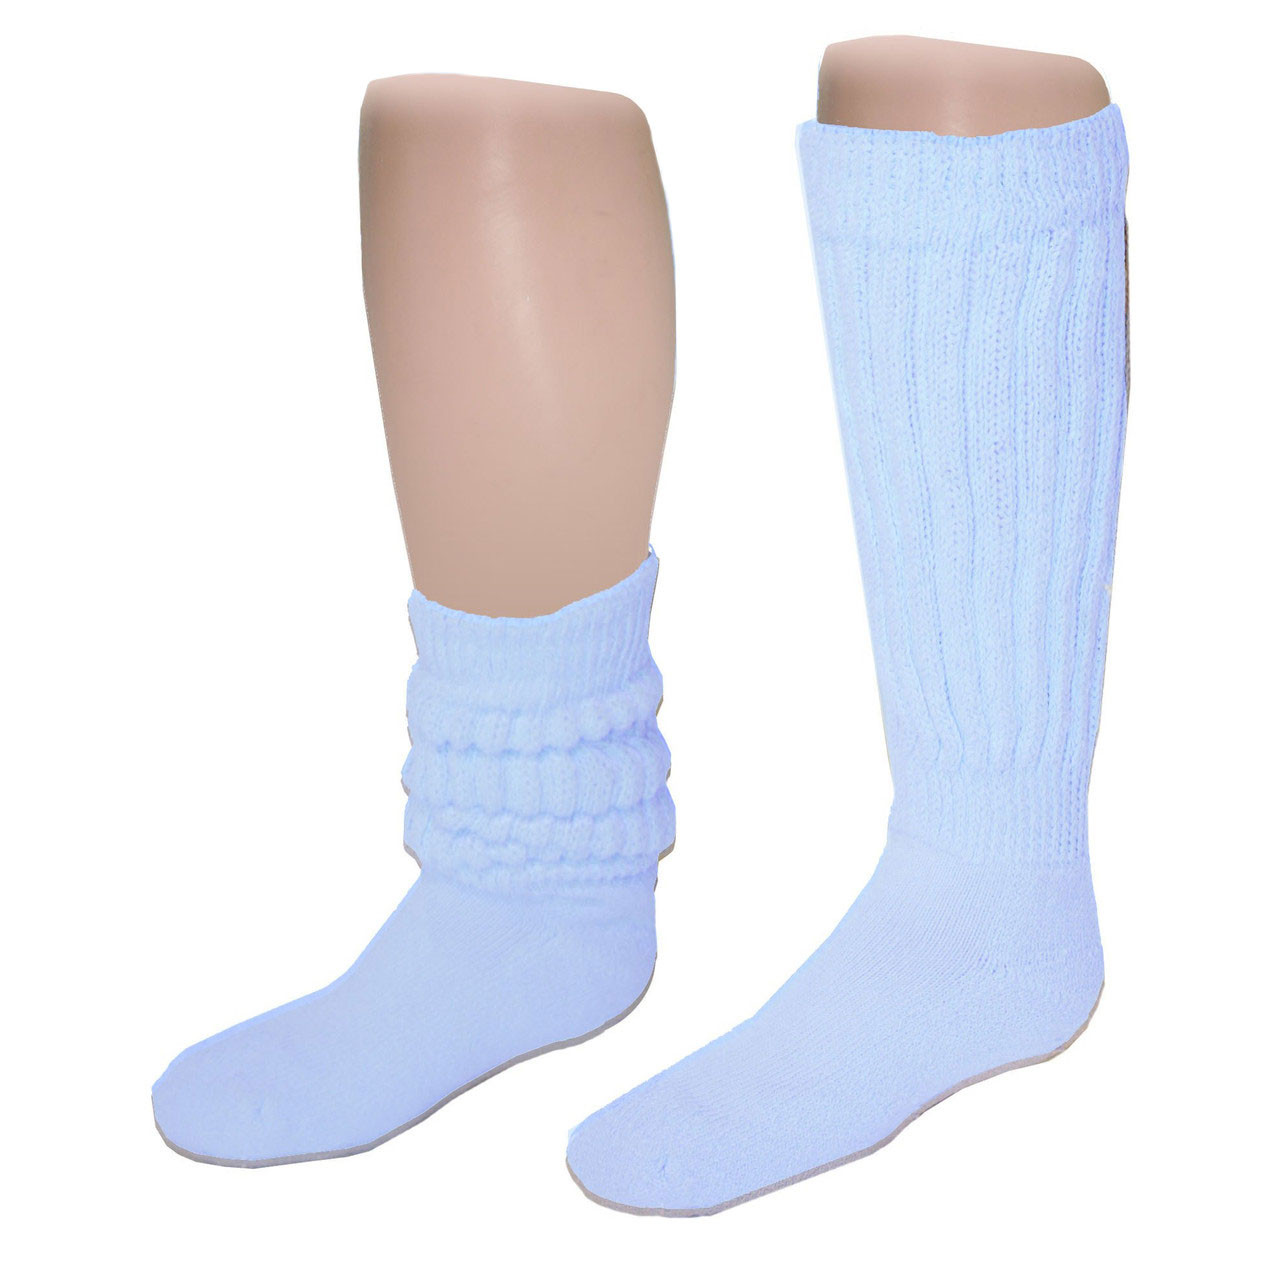 Slouch Socks for Kids Cotton Long and Heavy White 1 Pair 9-12 Years Old